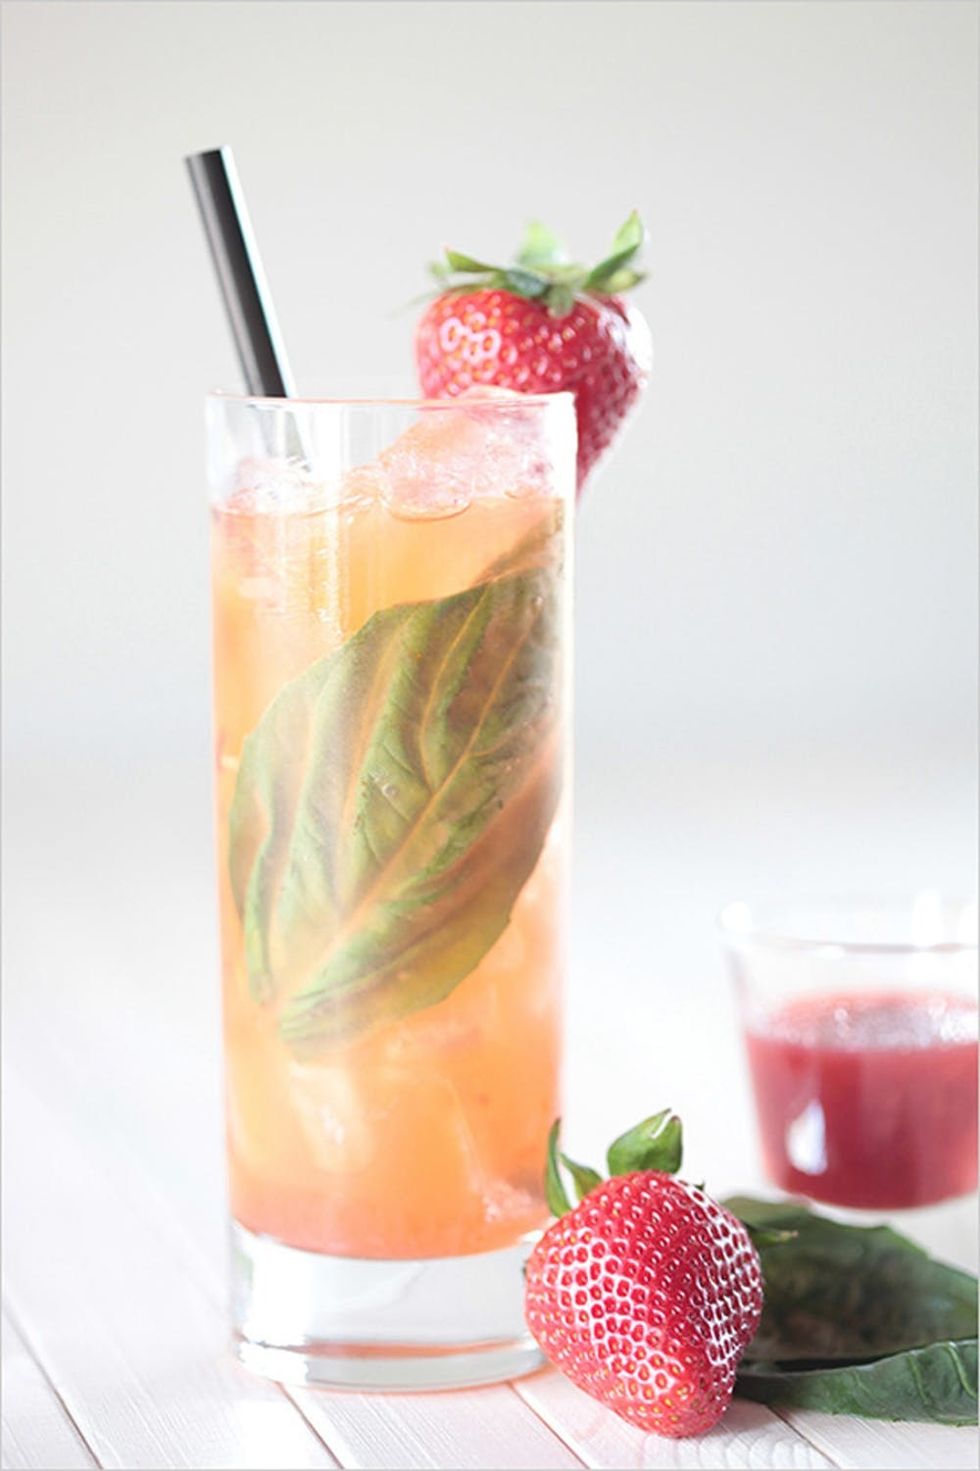 Strawberry Cachaca cocktail recipe to drink at a wedding